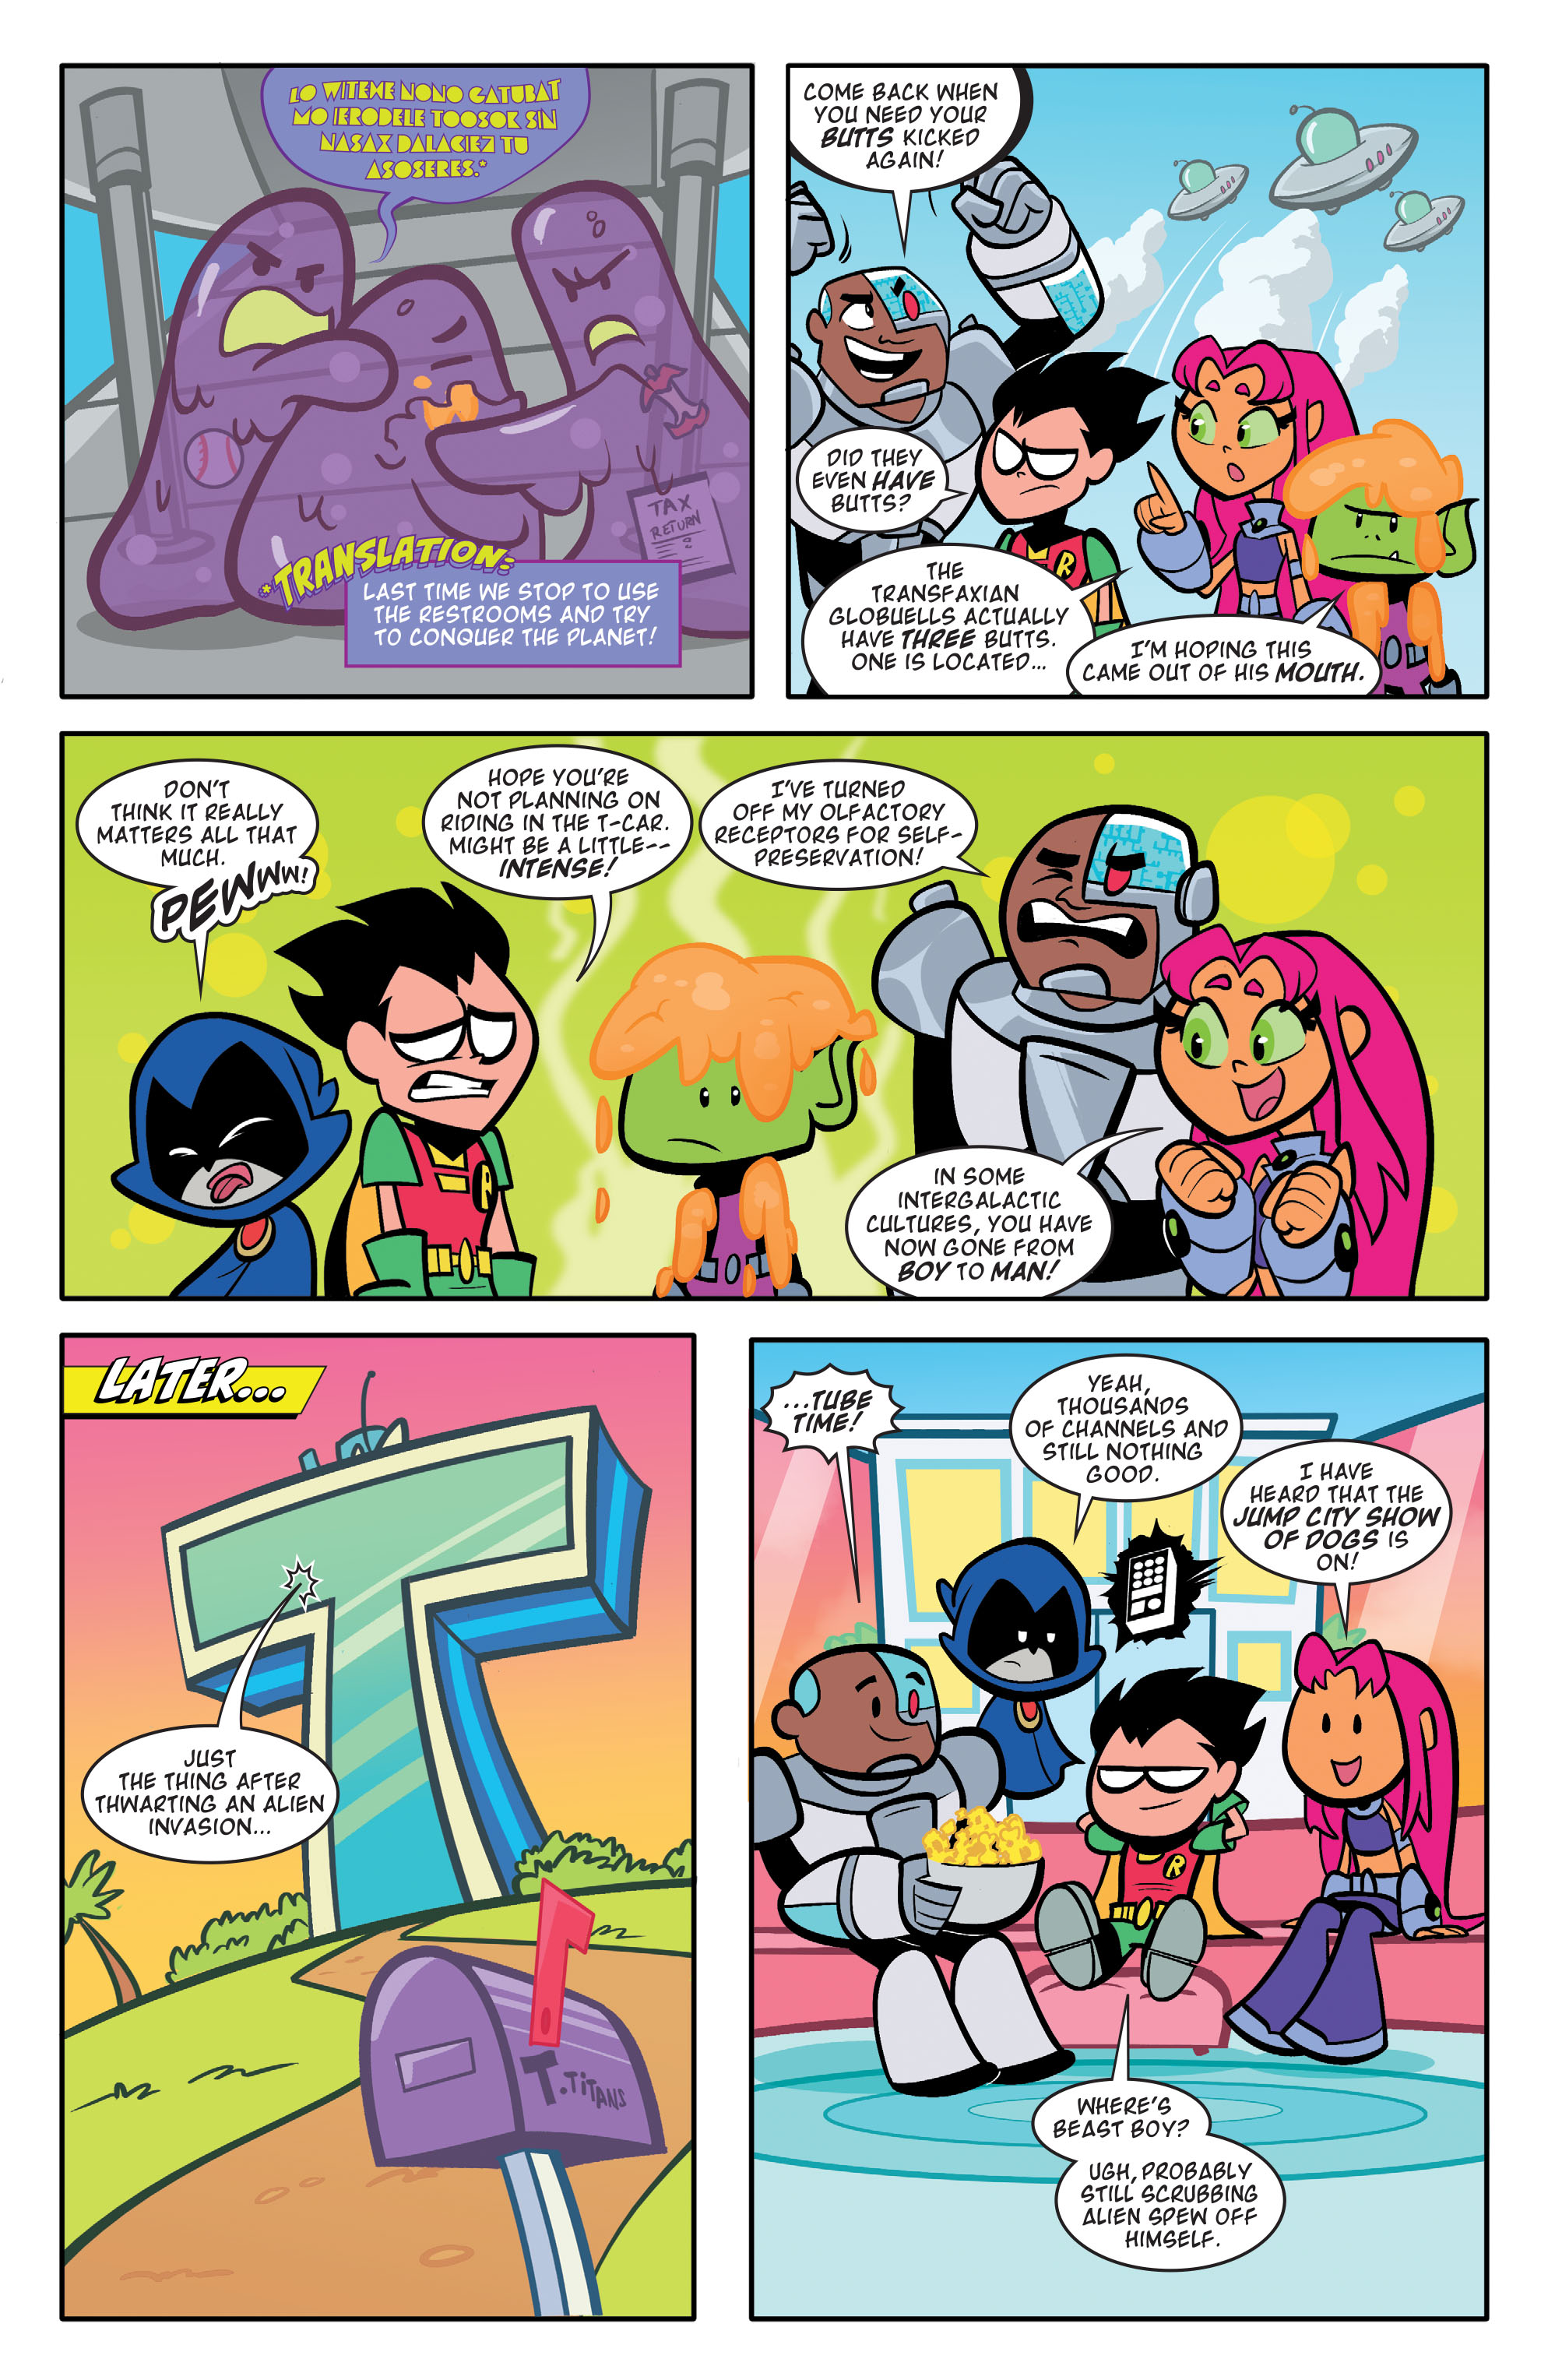 Teen Titans Go!: Booyah! (2020-): Chapter 3 - Page 3